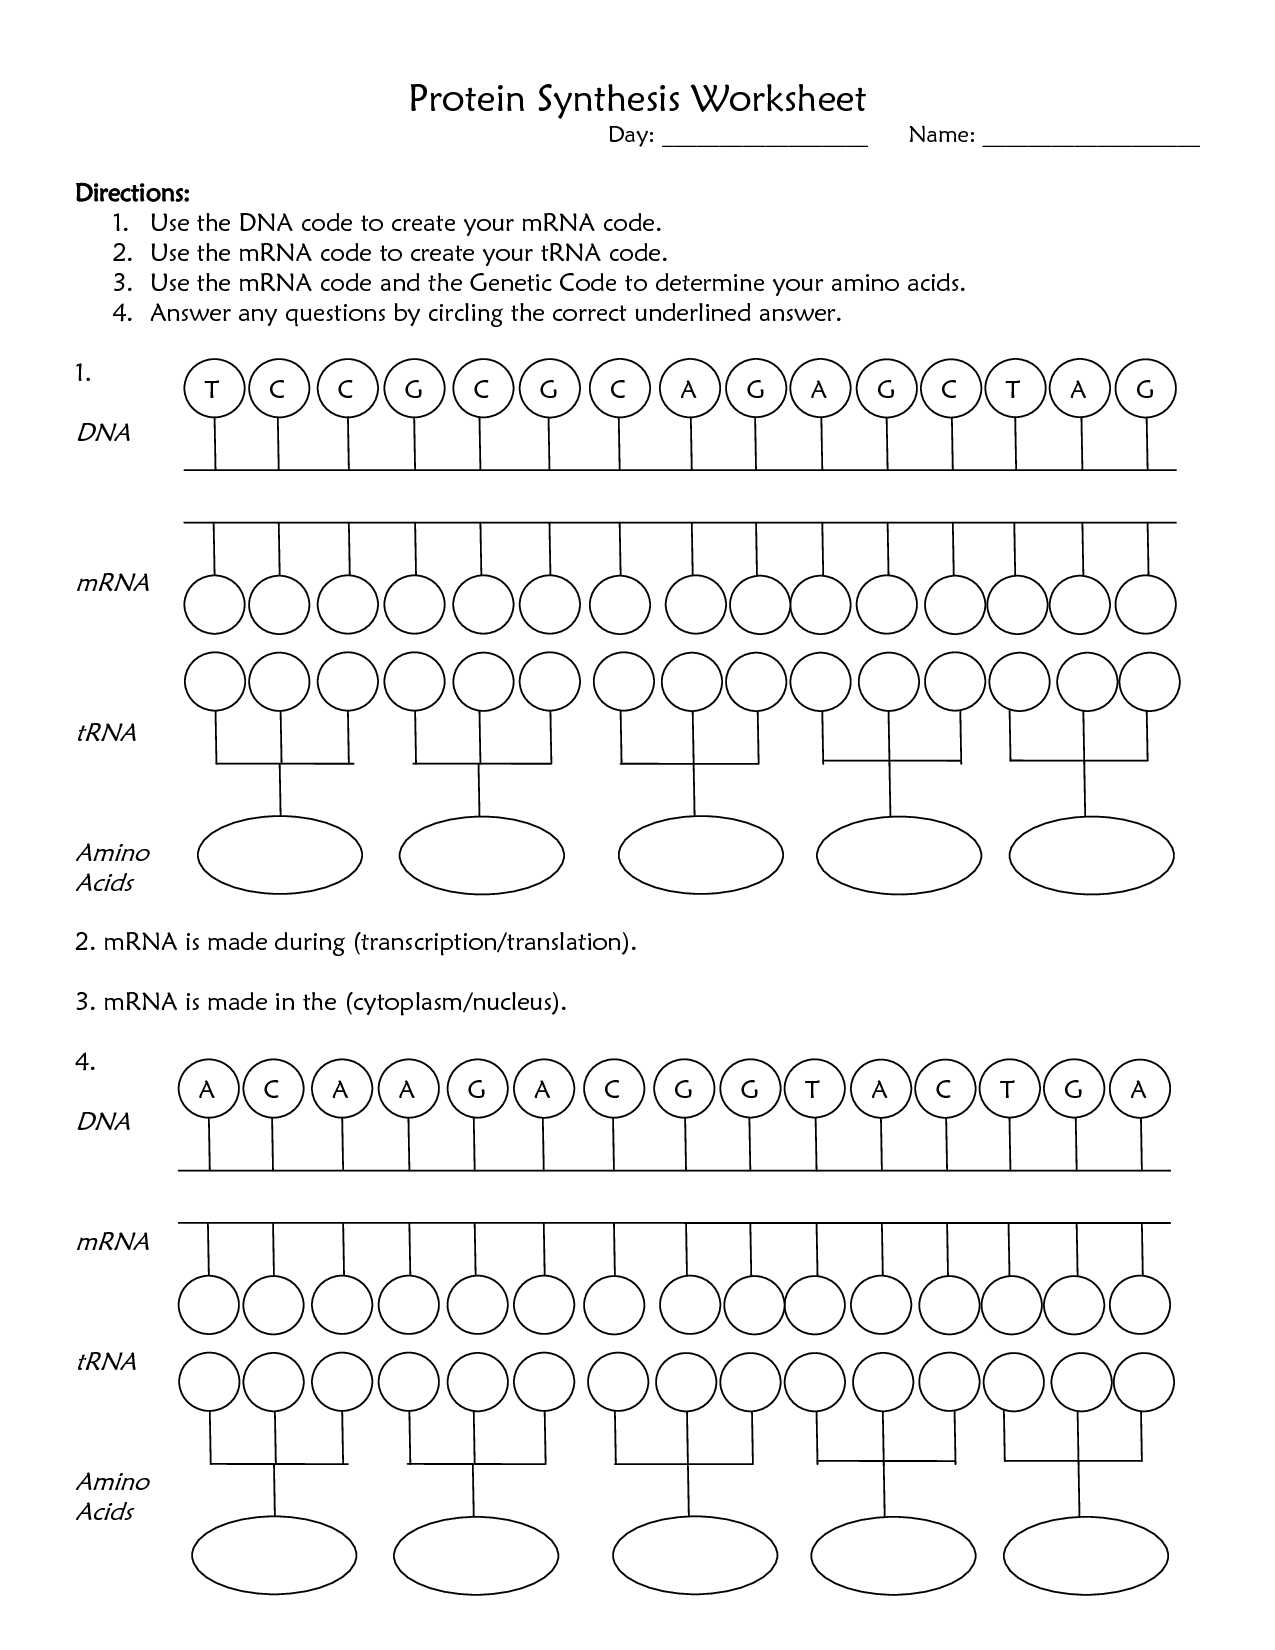 Dna Protein Synthesis Worksheet - ProteinWalls Inside Protein Synthesis Worksheet Answers